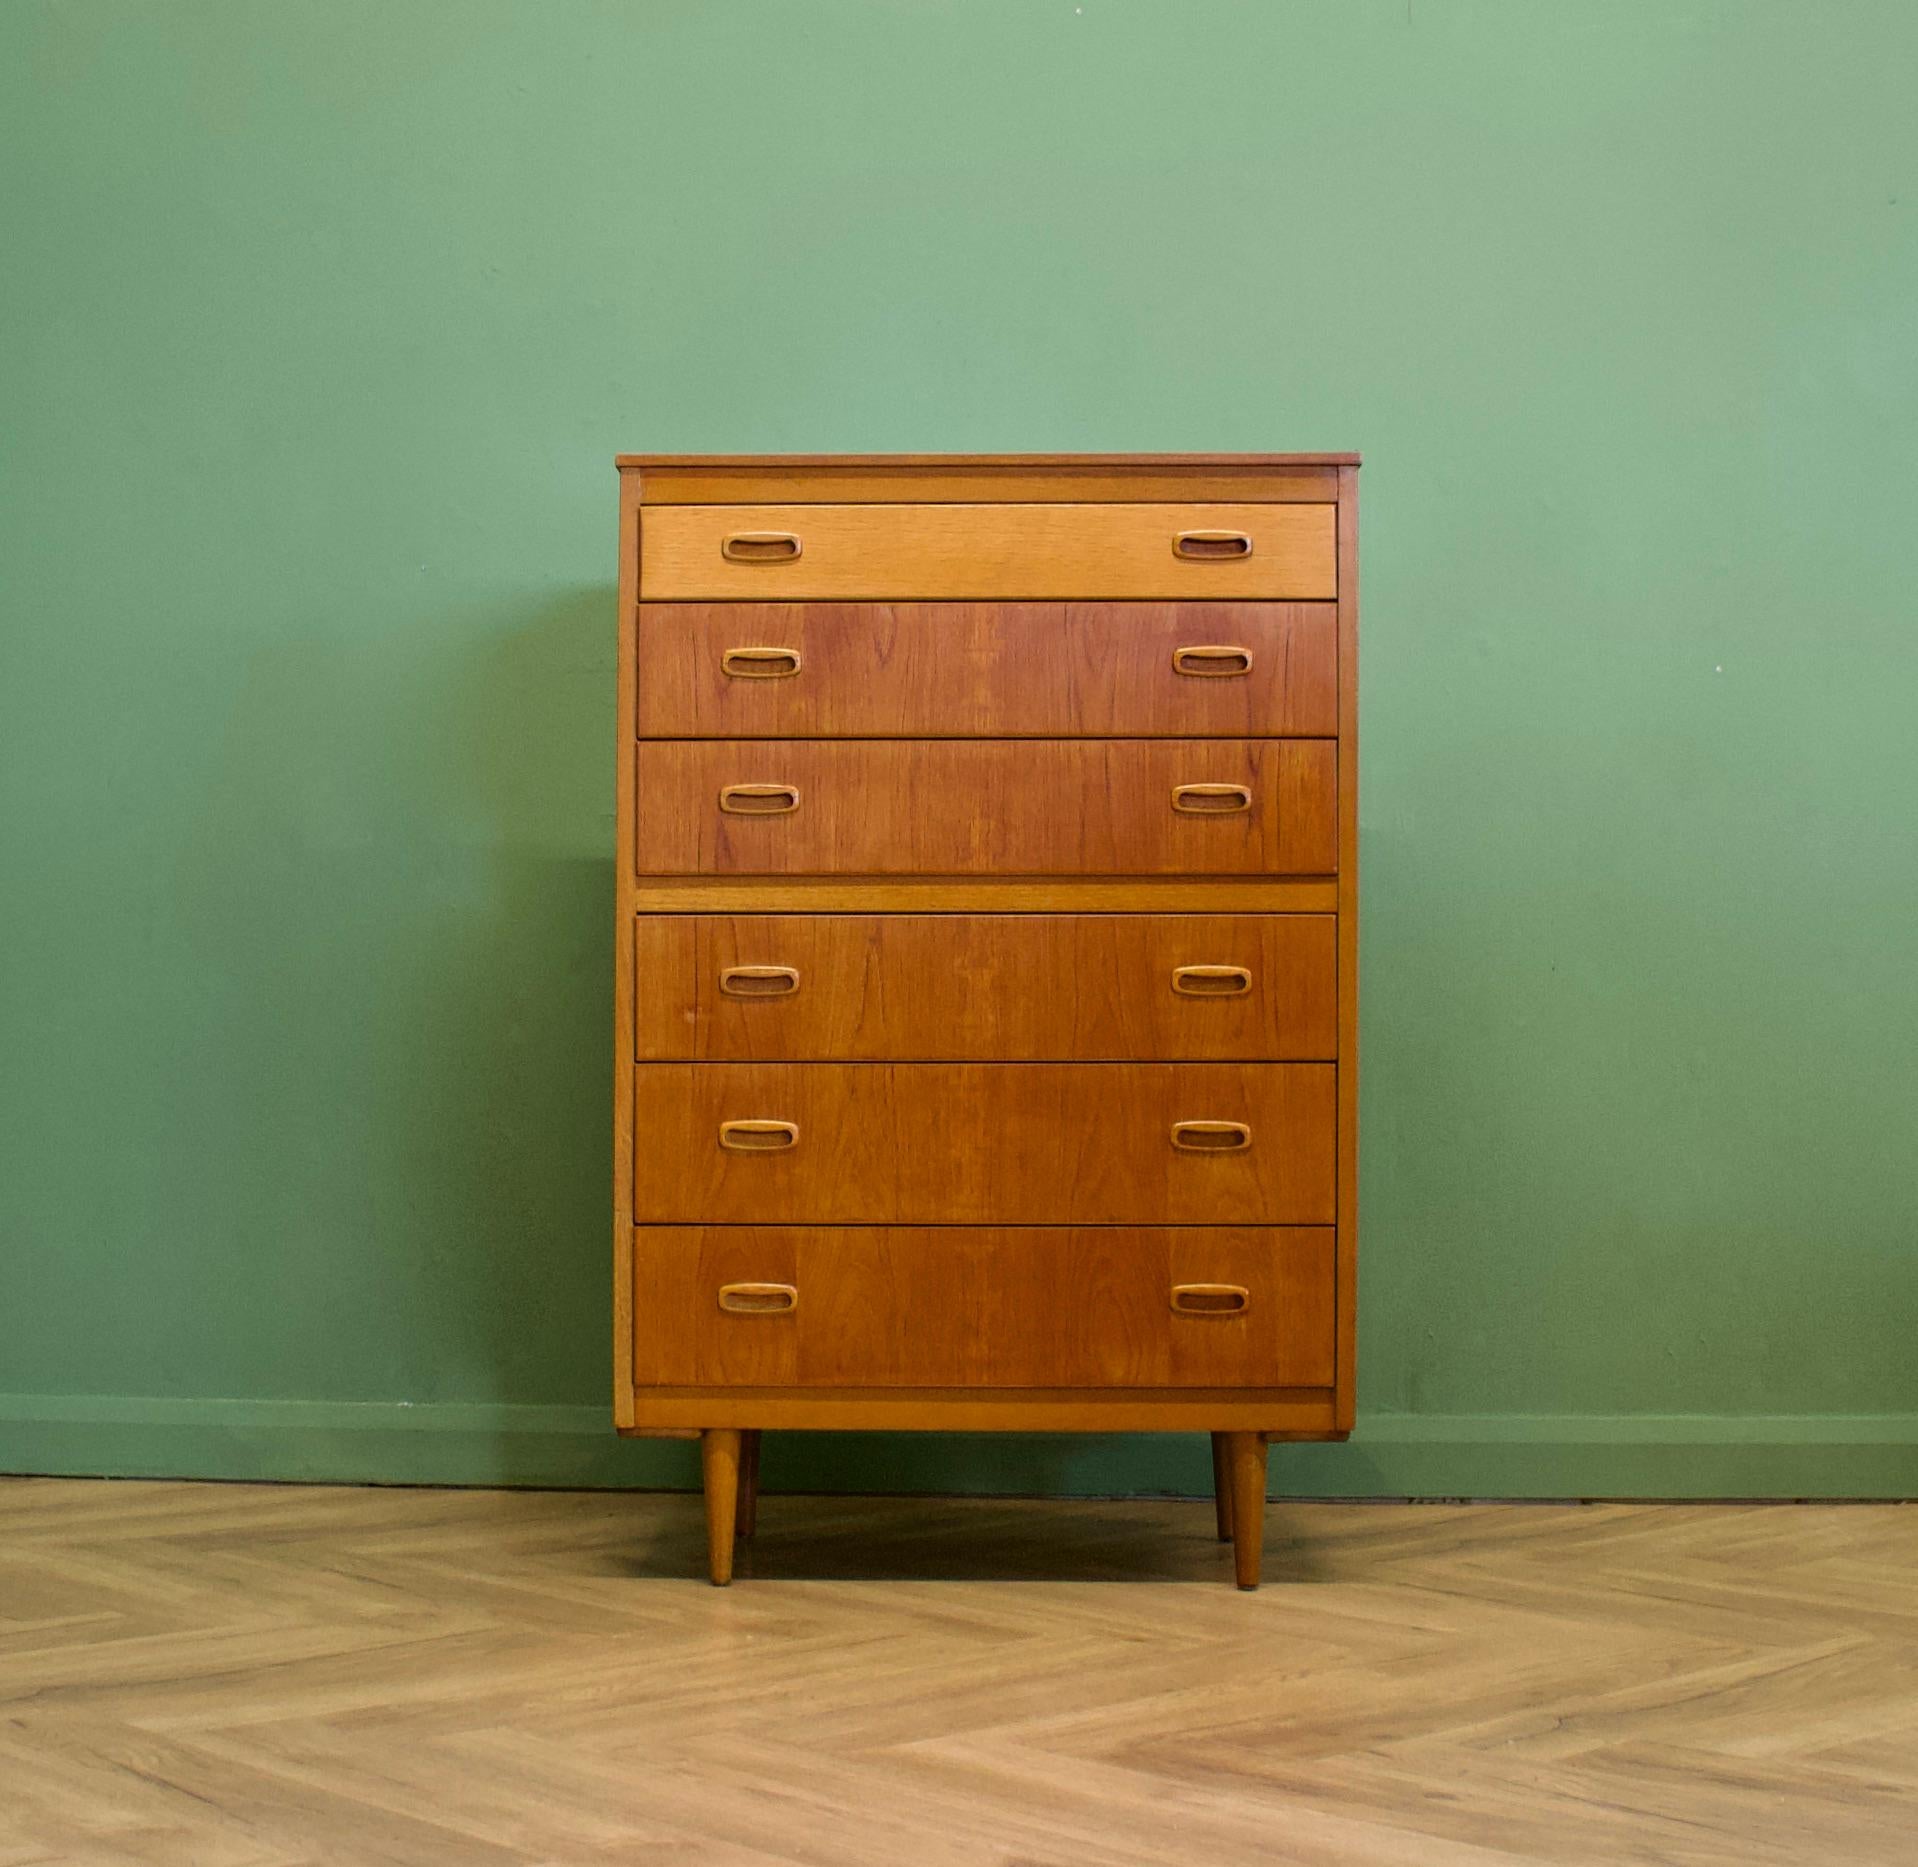 A mid century Danish teak tallboy chest of drawers - circa 1960s


Featuring 6 drawers and solid teak handles and legs
Standing on slightly splayed legs